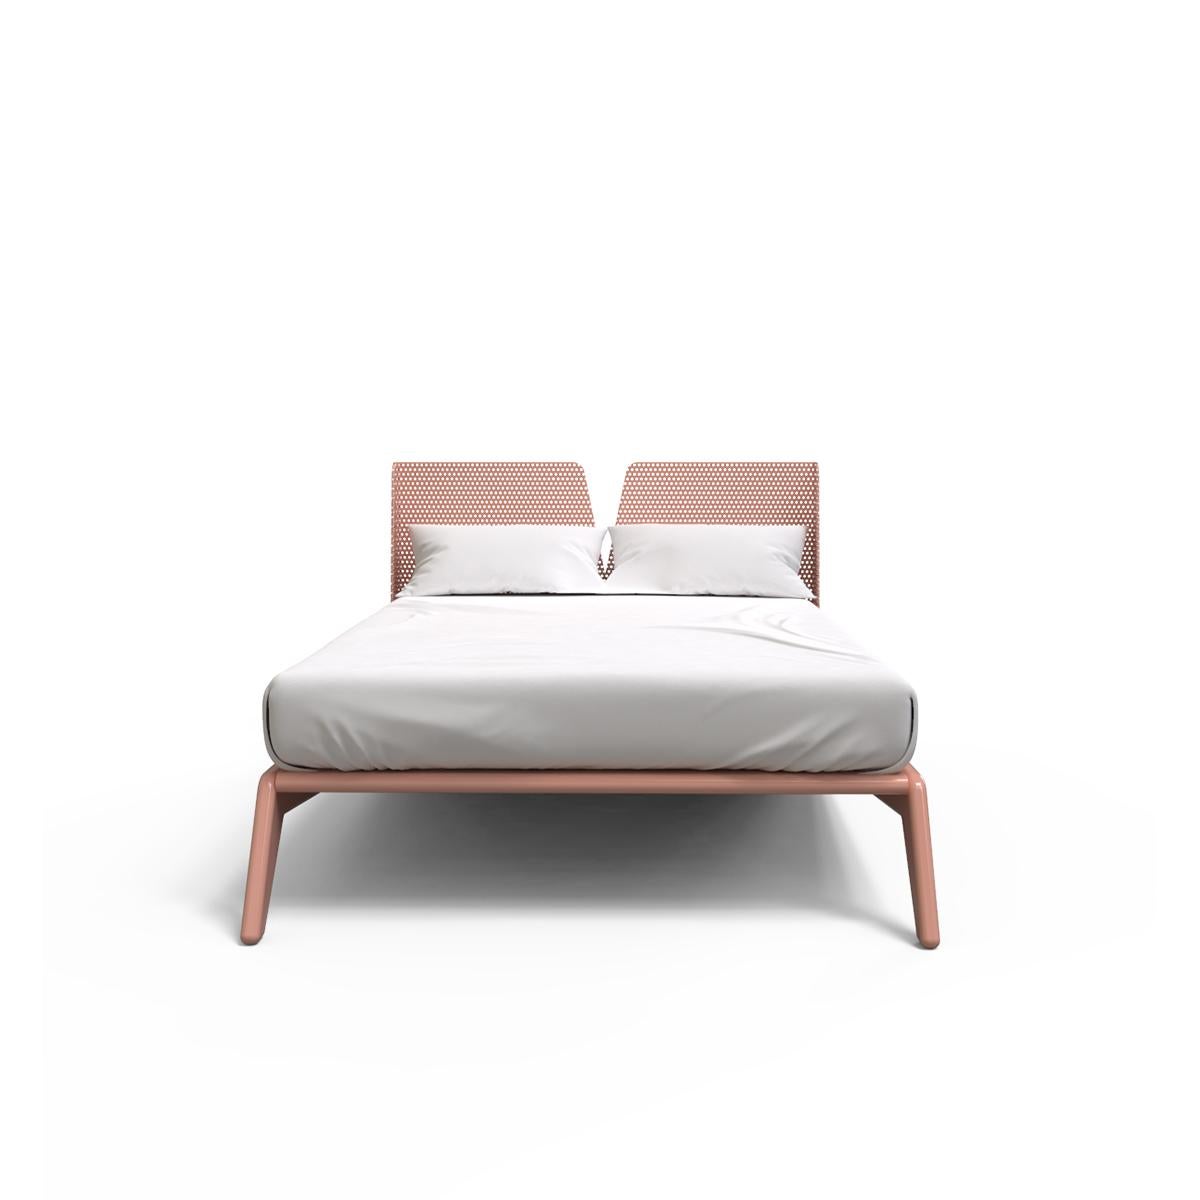 The steel frame features a sleek pink finish, perforated metal add visual interest to the overall Minimalist look. A mix of wood and metal support your mattress, two lean legs add an accent to the design.
Dream on this Kabil bed.

Beech, ash or